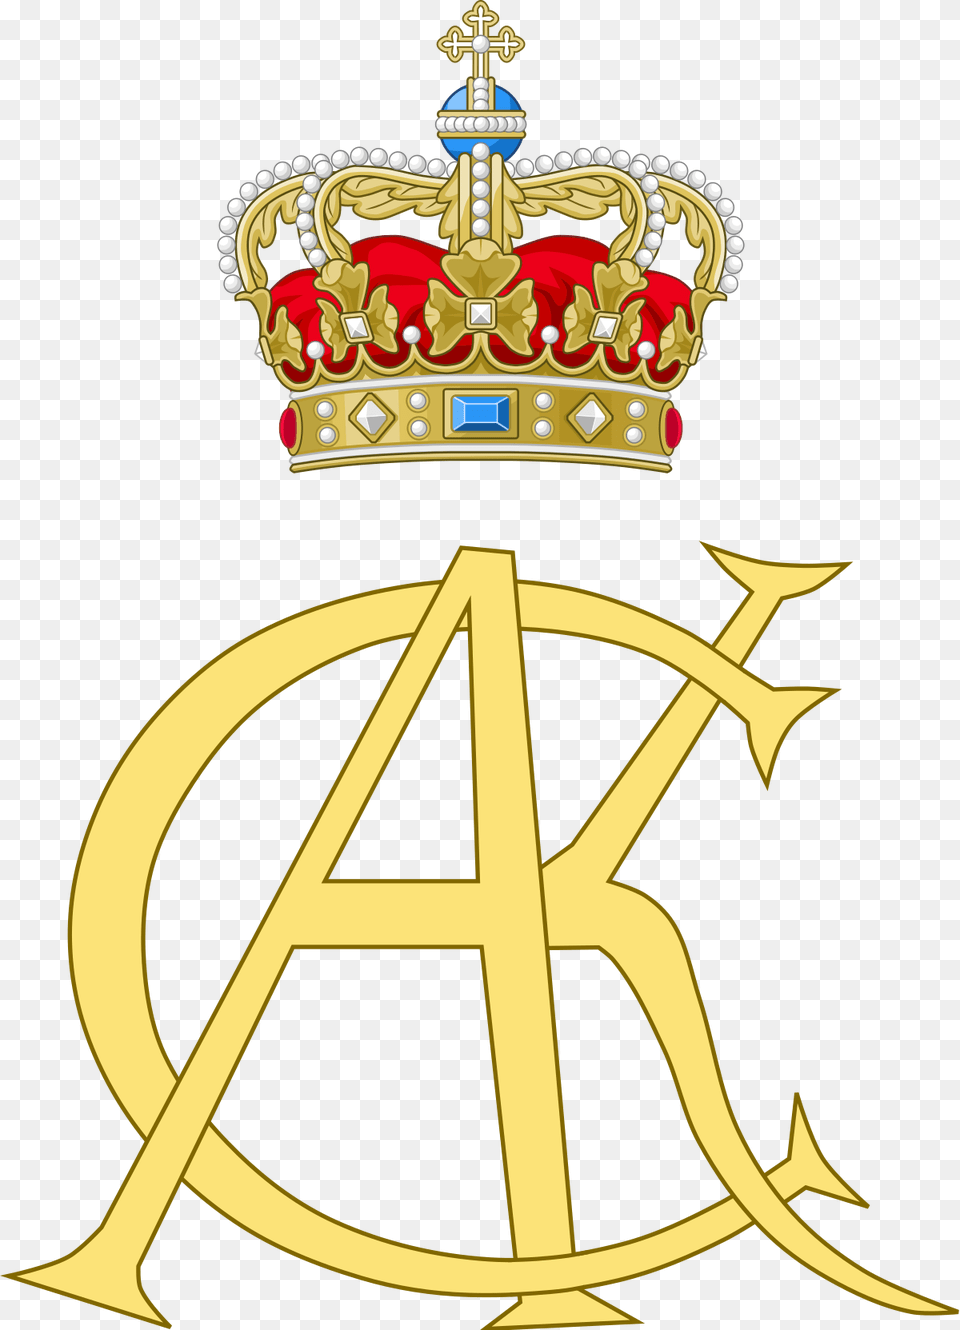 King Christian X Symbol, Accessories, Jewelry, Crown, Cross Png